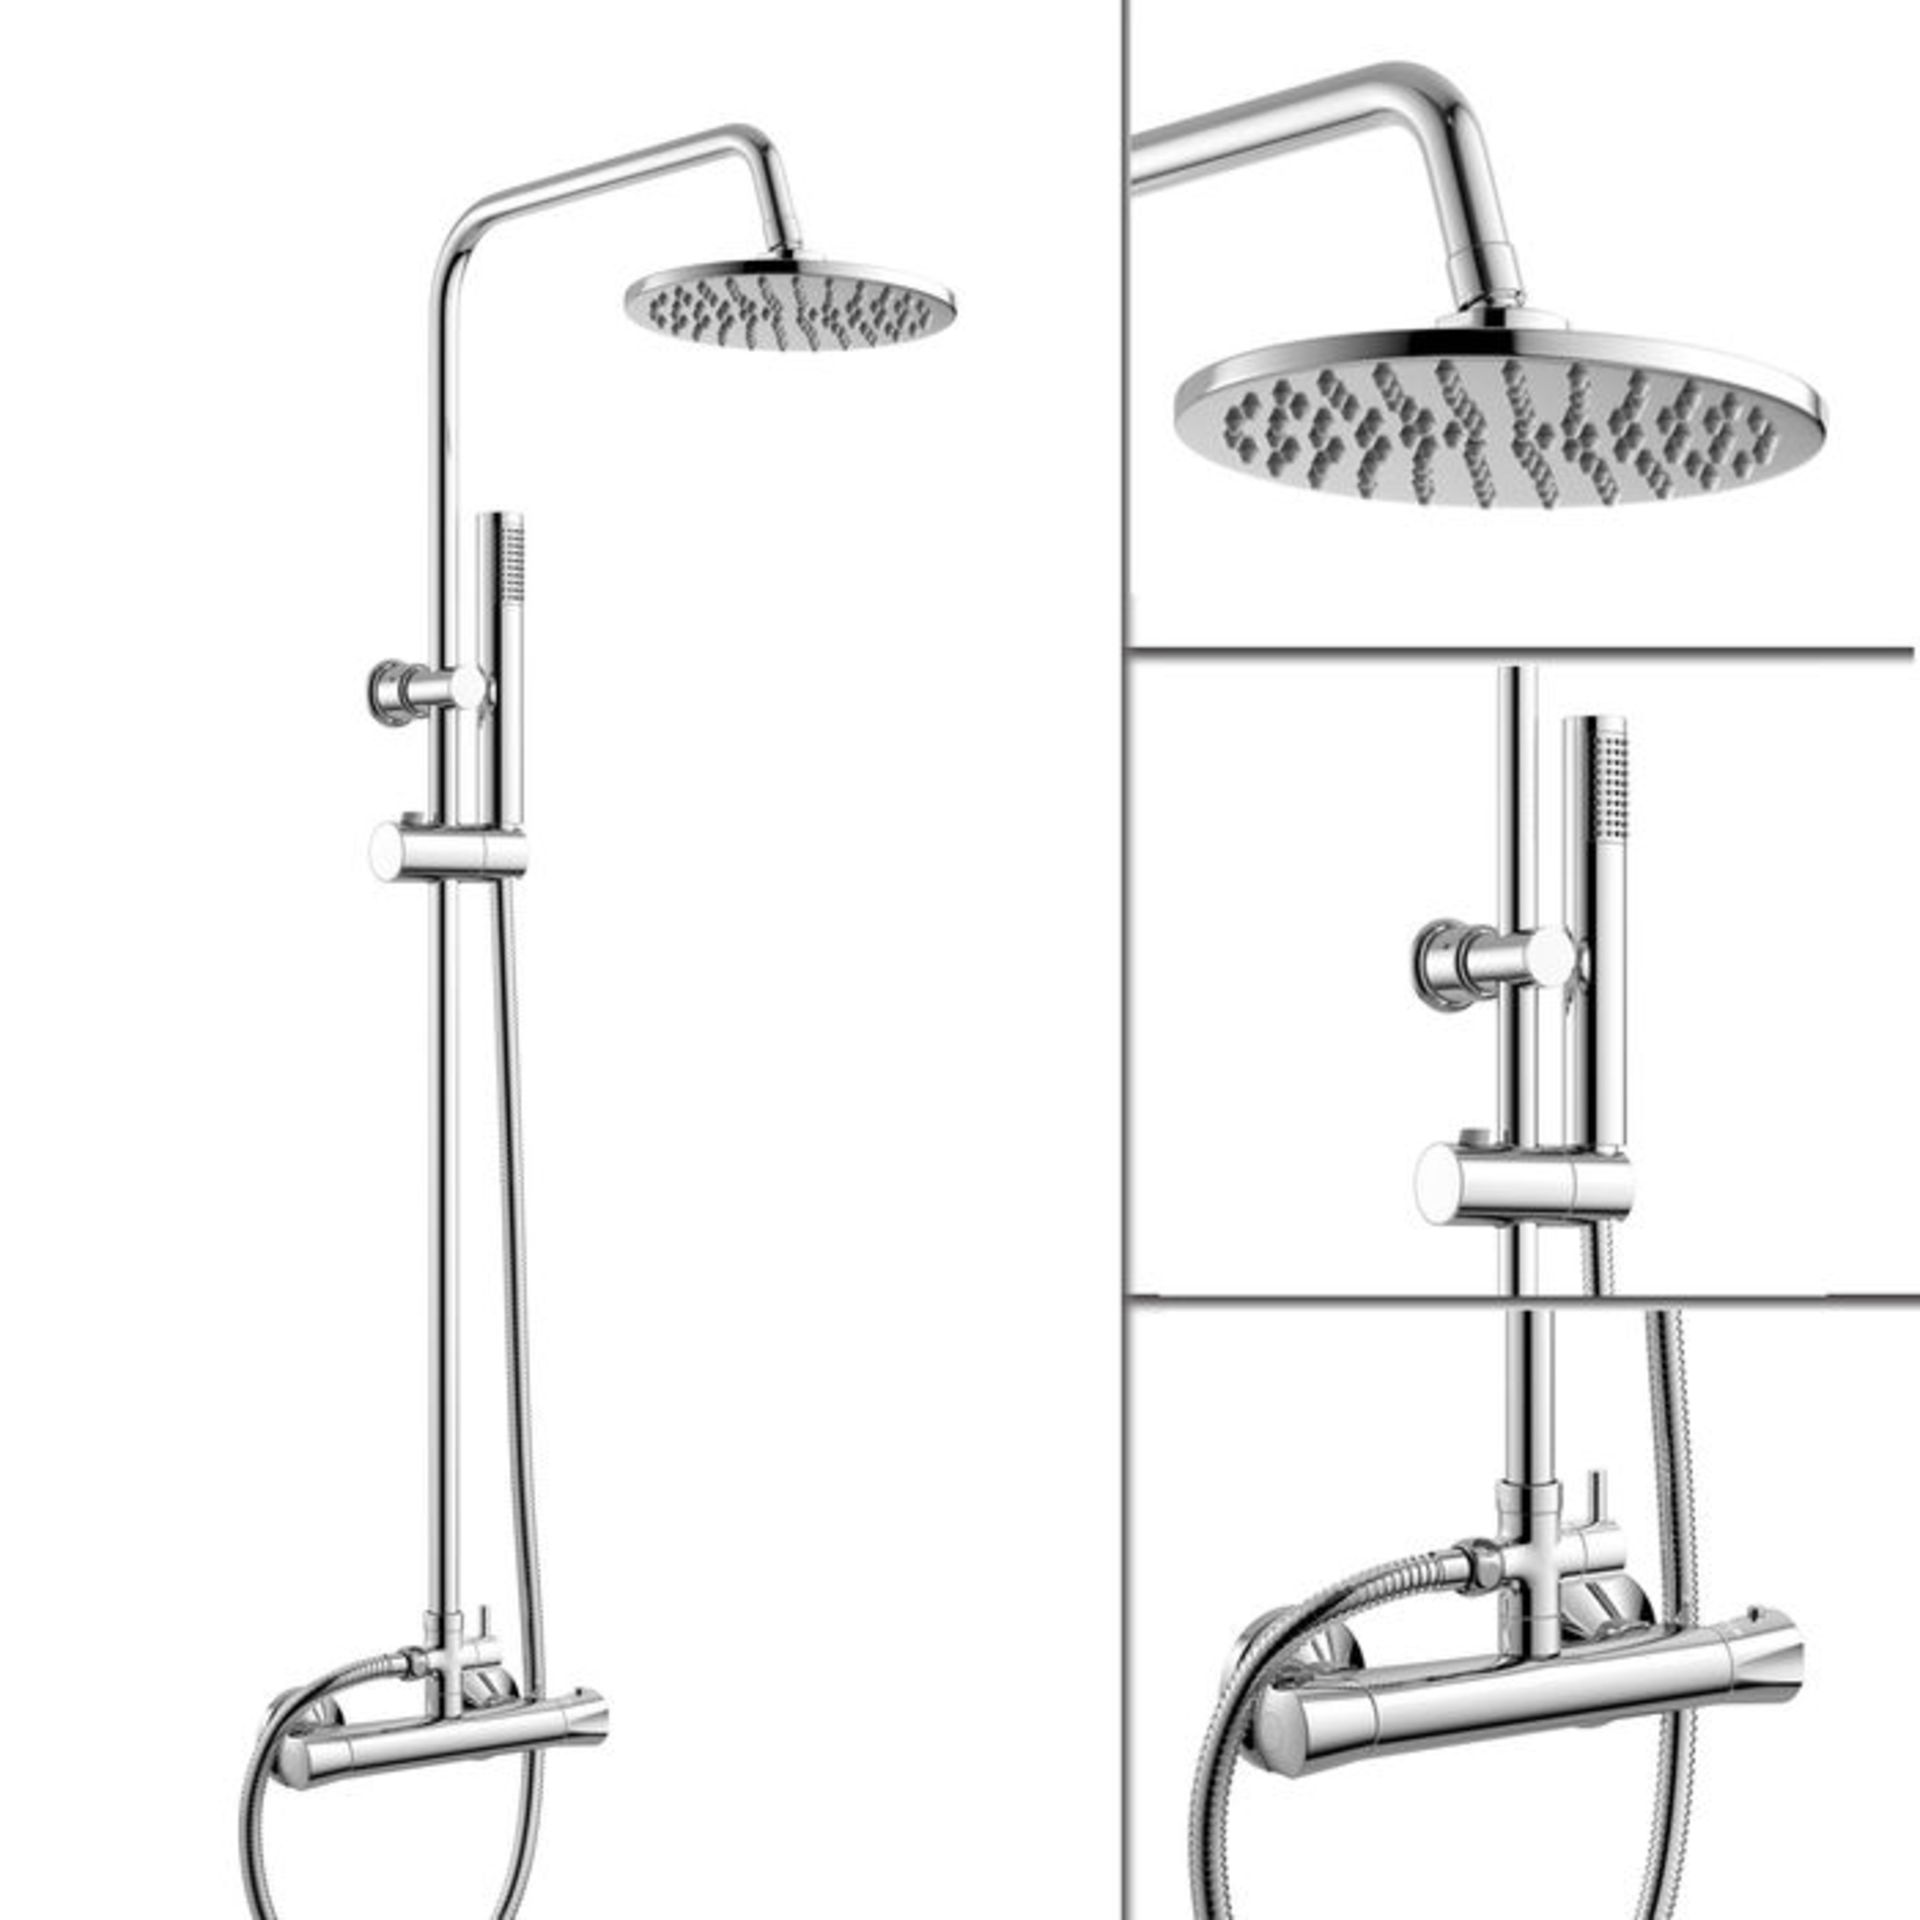 (CT154) Round Exposed Thermostatic Shower Kit & Head. Shower head features a tilt action for maximum - Image 2 of 2